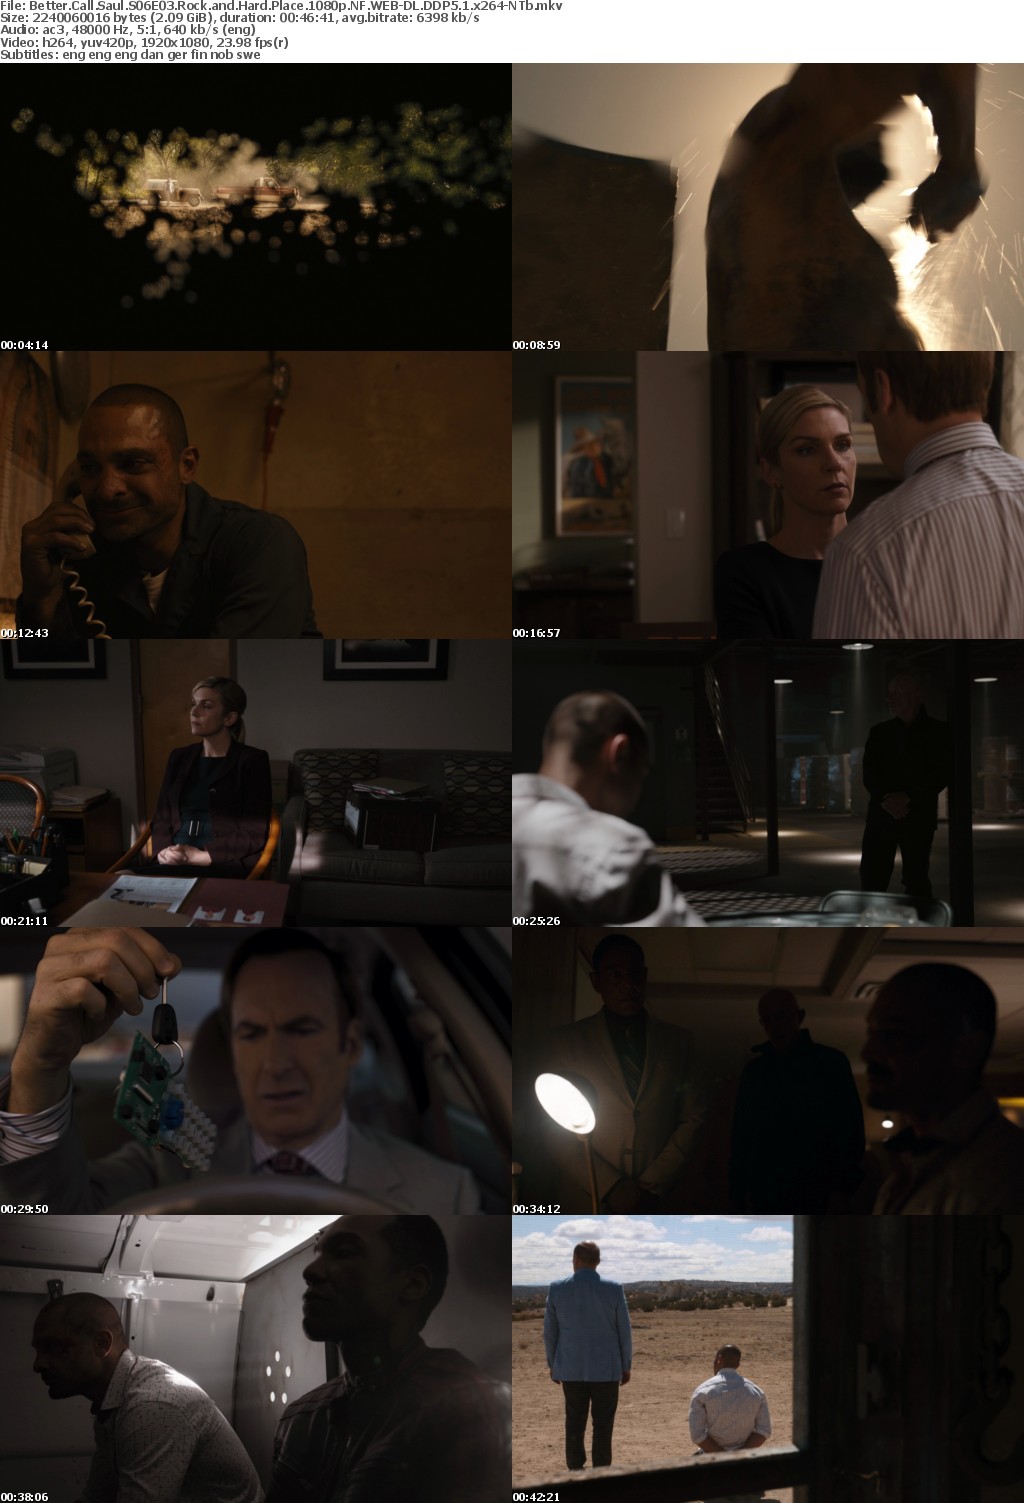 Better Call Saul S06E03 Rock and Hard Place 1080p NF WEBRip DDP5 1 x264-NTb